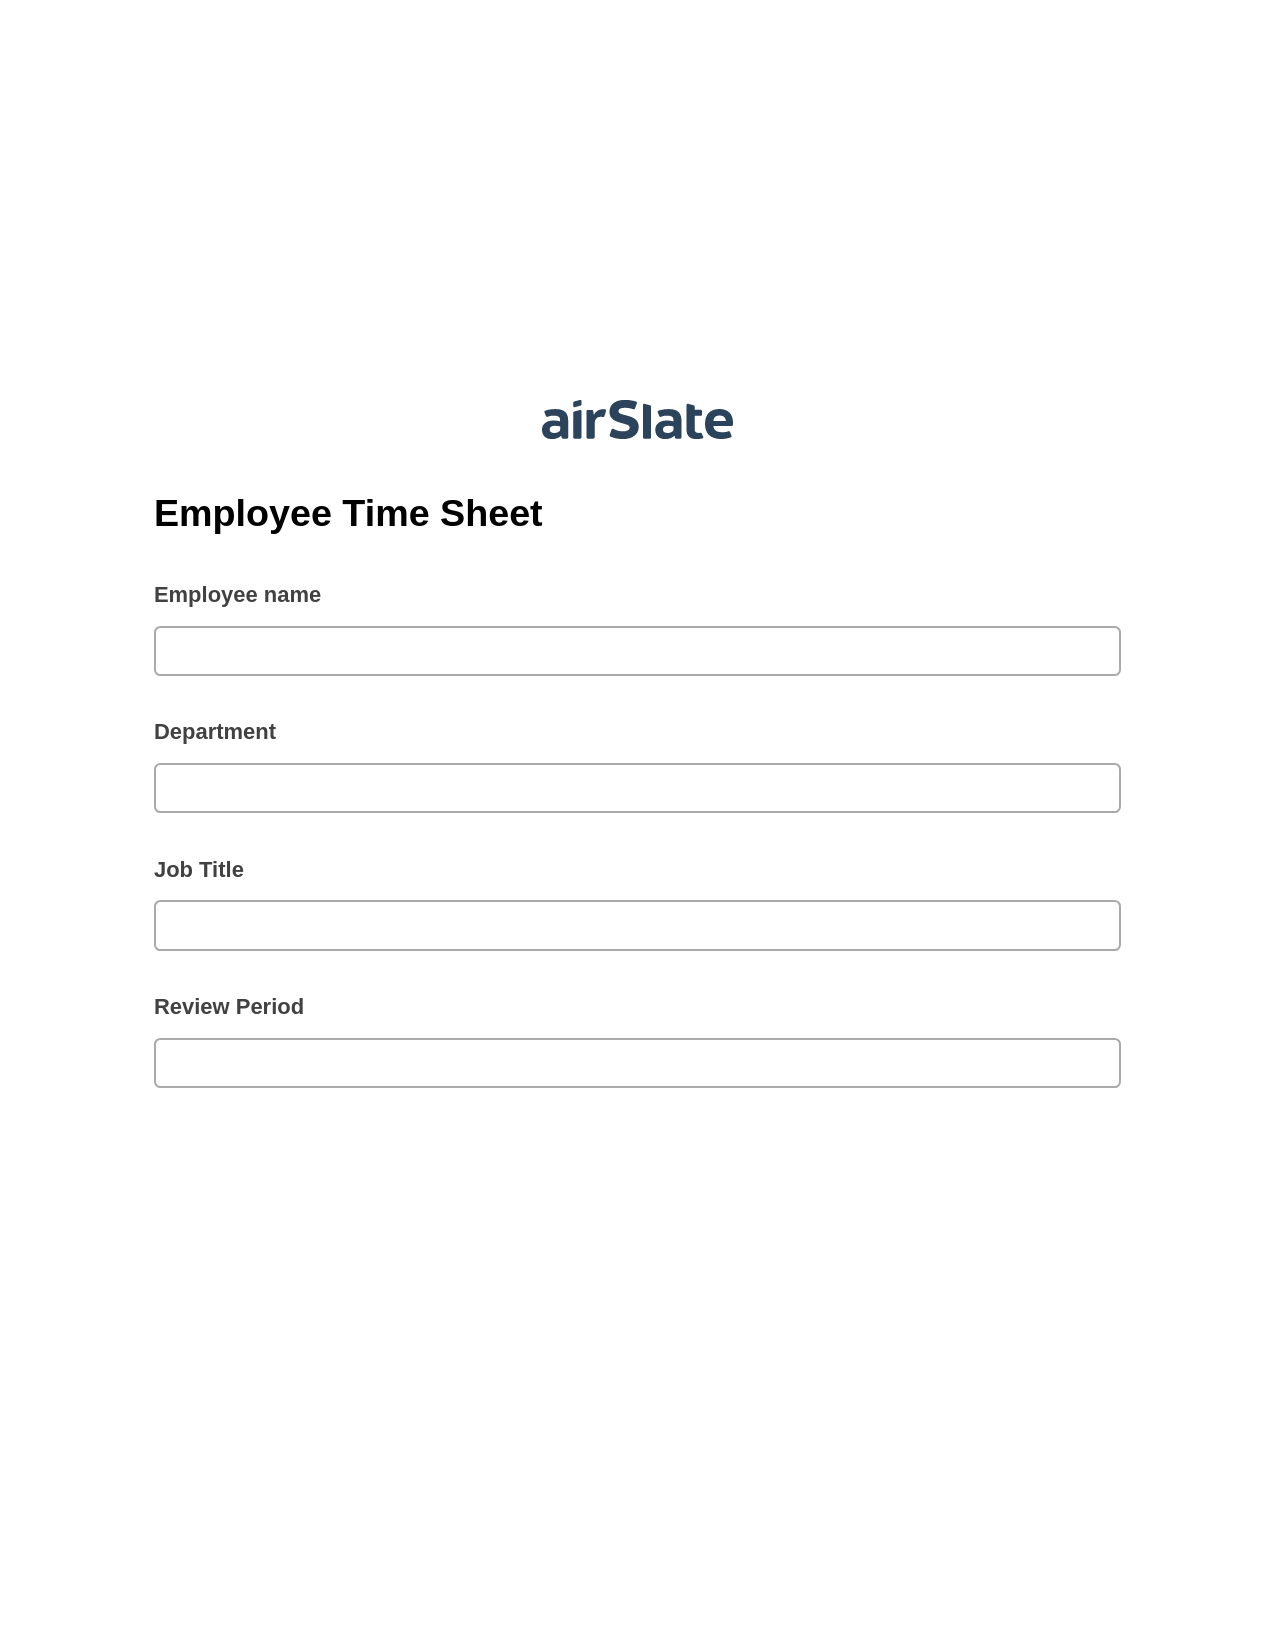 Employee Time Sheet Prefill from NetSuite records, Create Salesforce Records Bot, Export to Google Sheet Bot